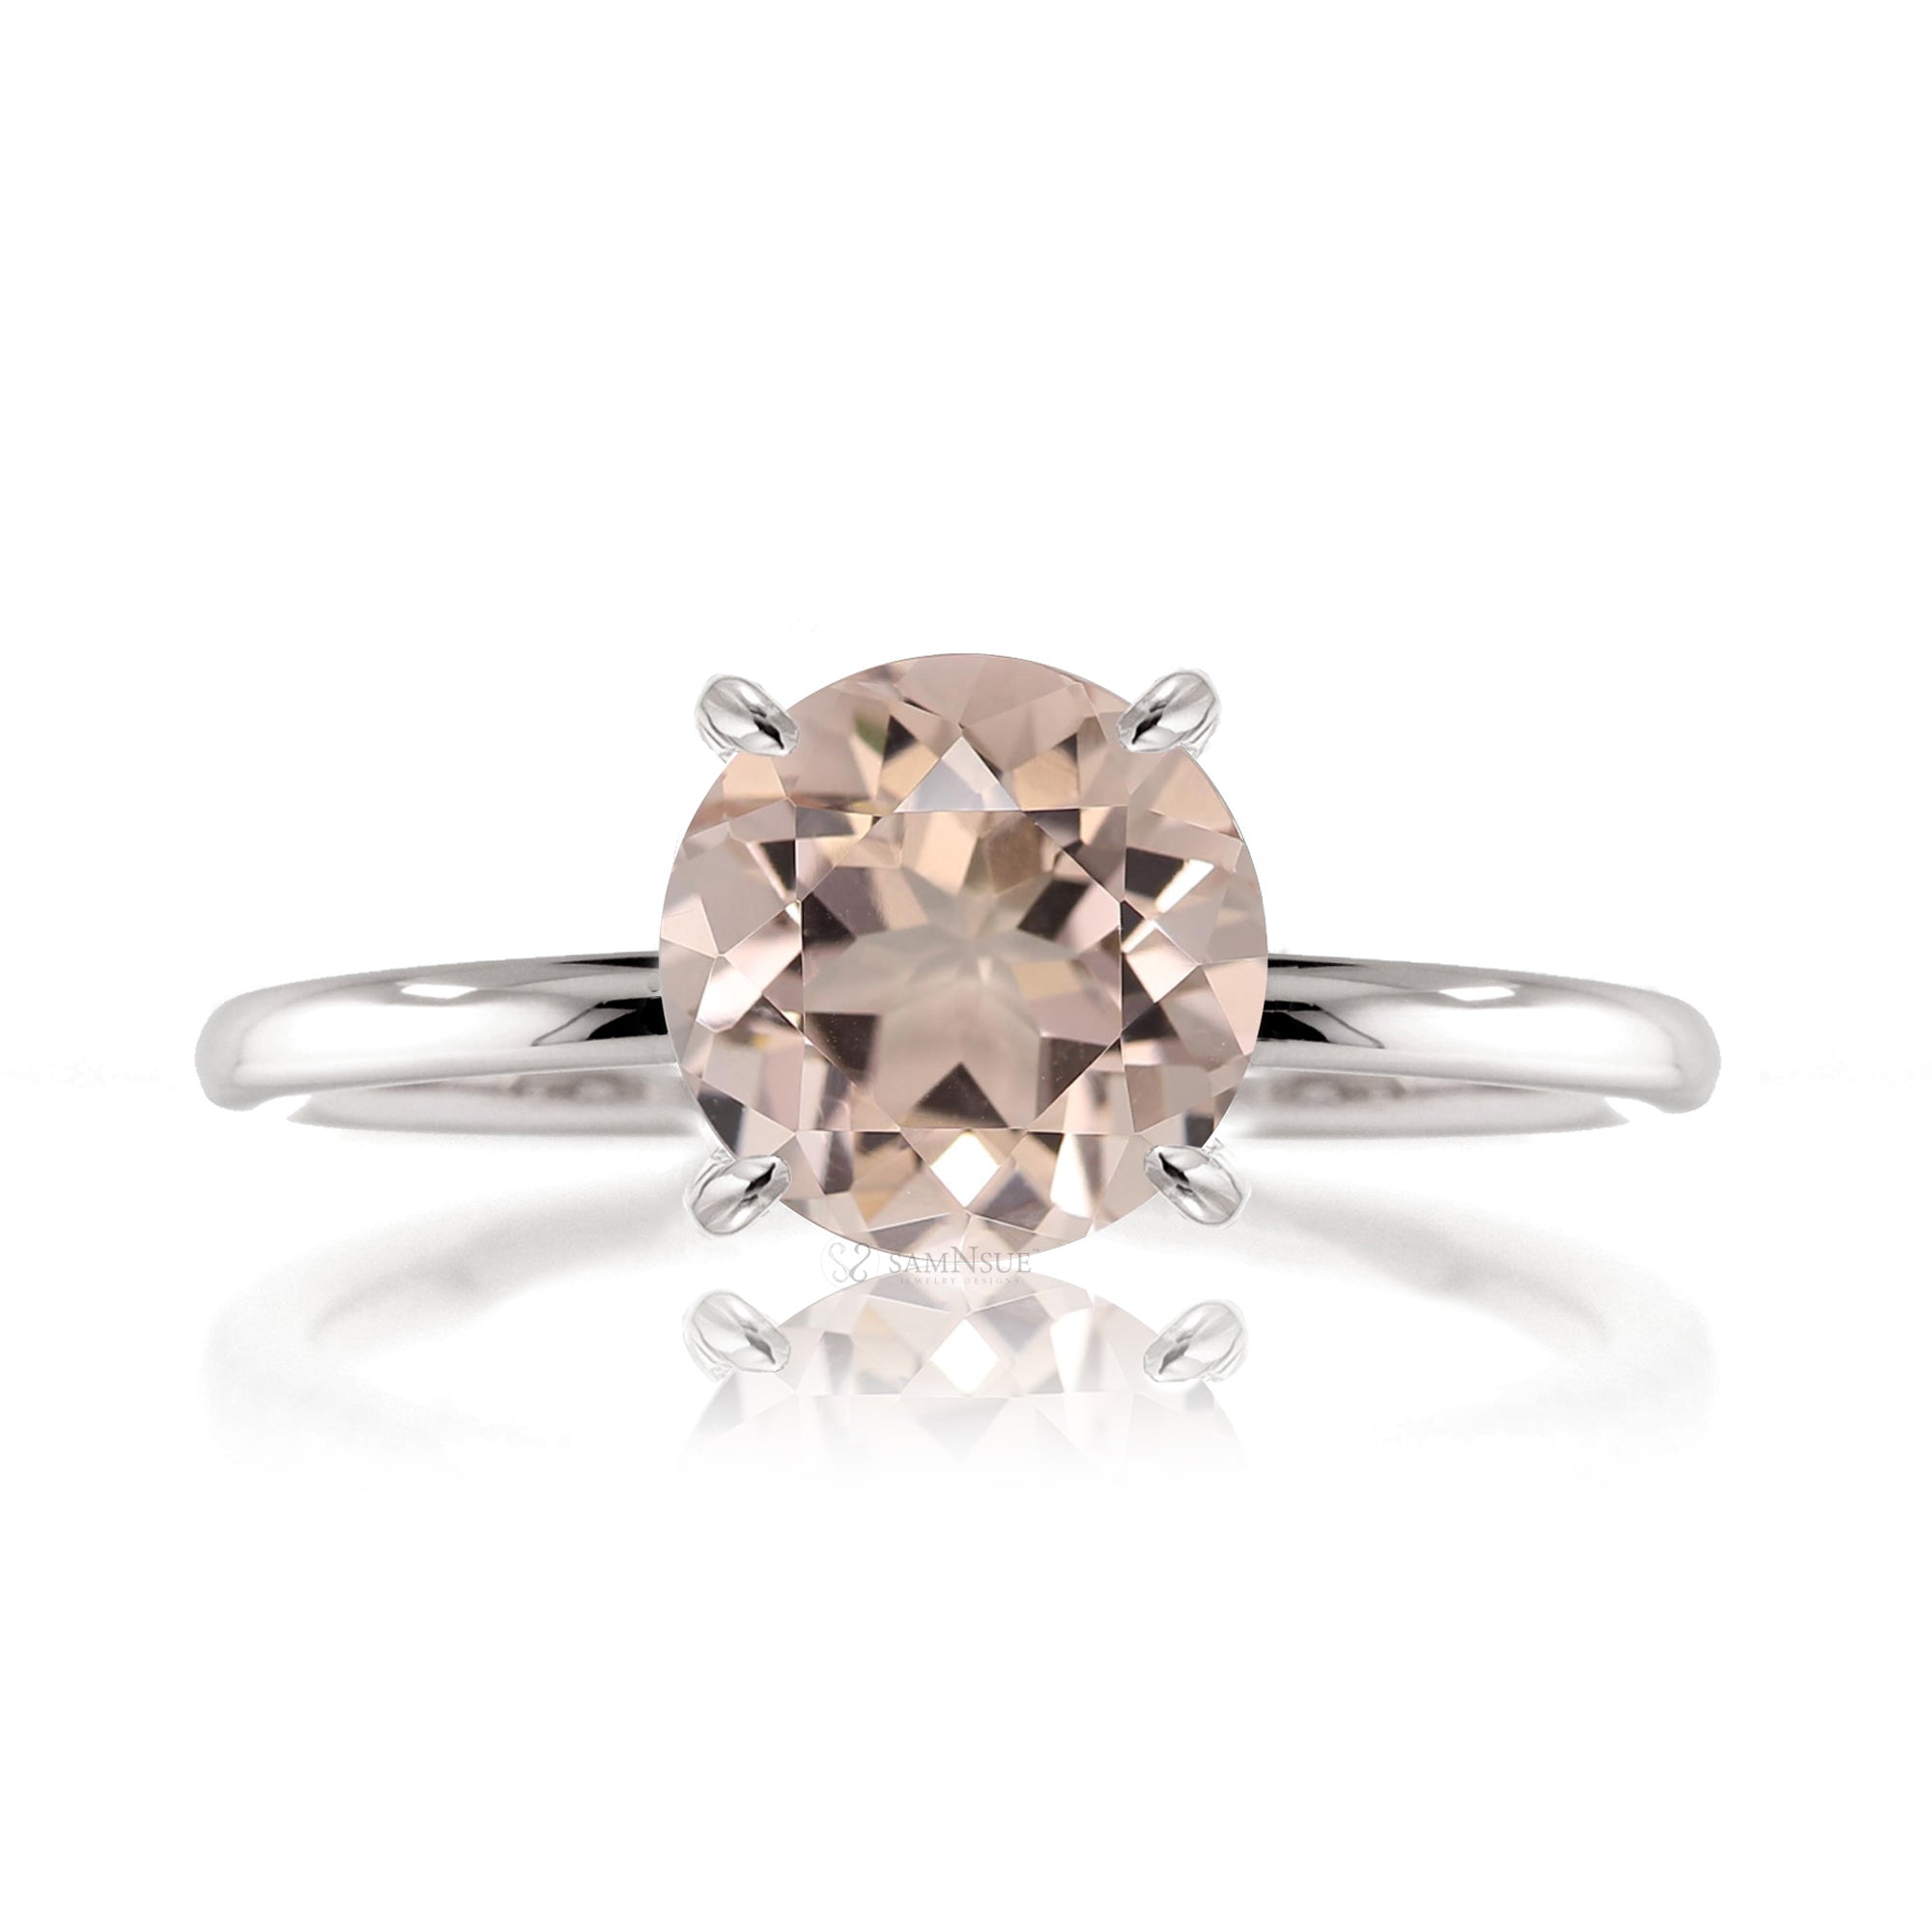 Round morganite solid band engagement ring white gold - The Ava